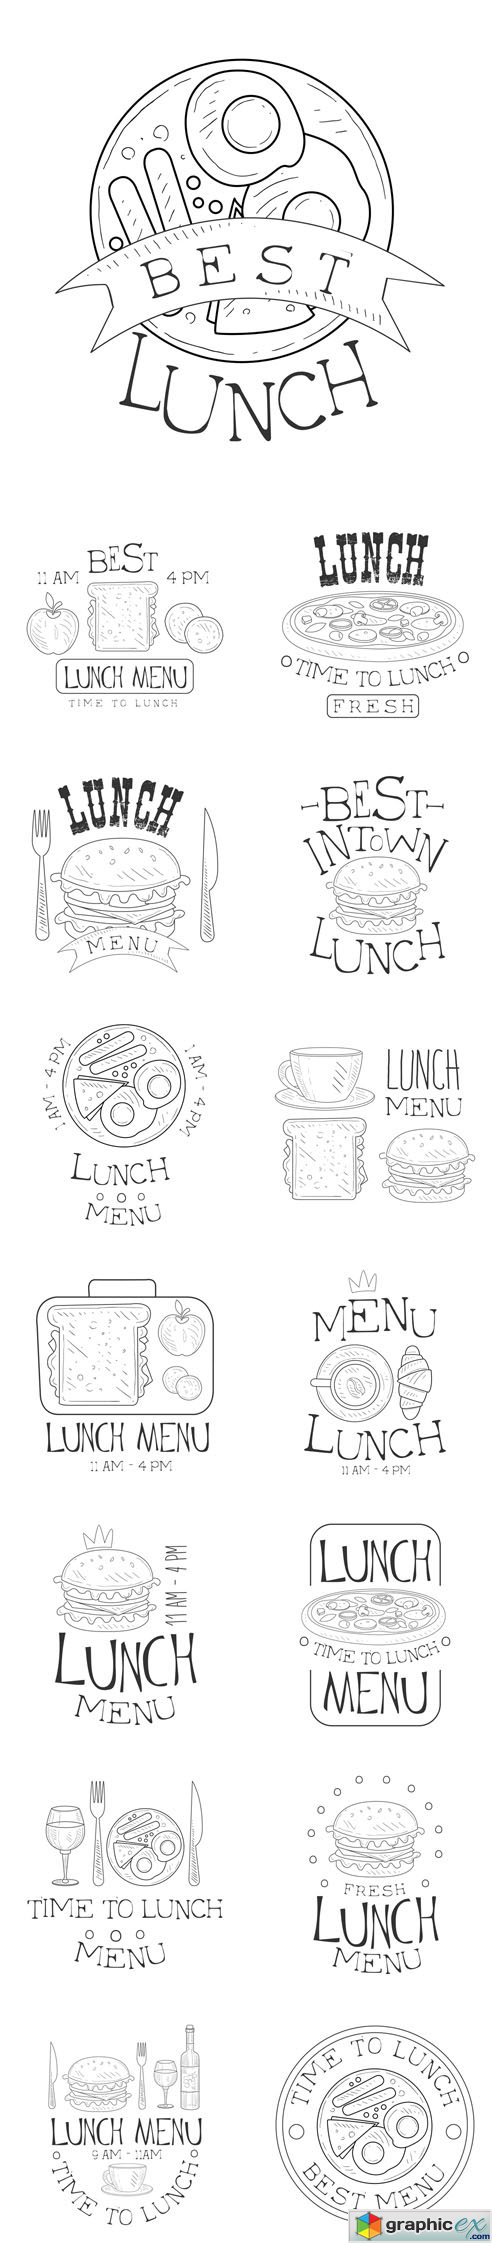 Best Cafe Lunch Menu Promo Signs In Sketch Style